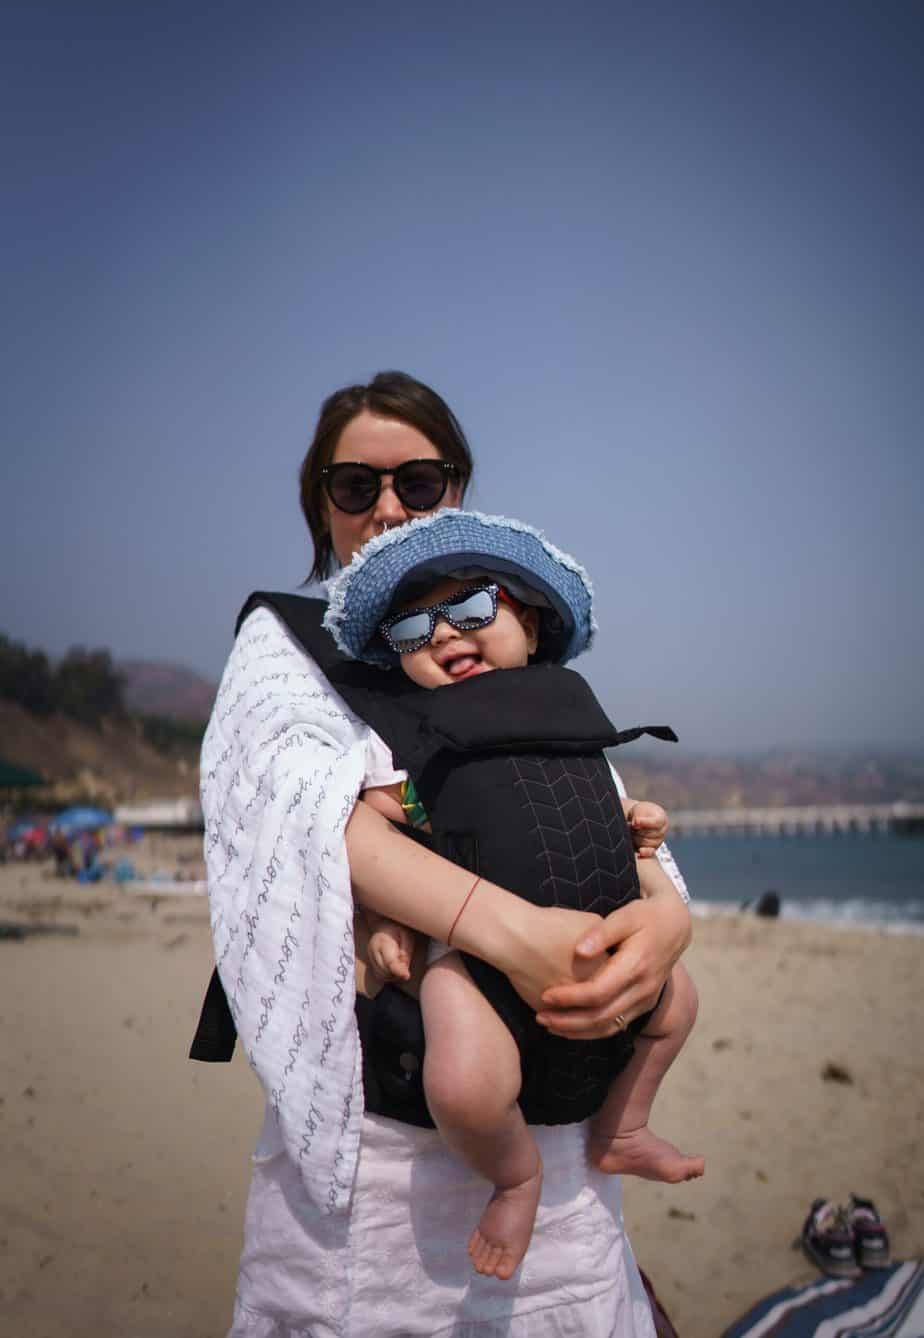 How Long Can You Carry a Baby in a Carrier